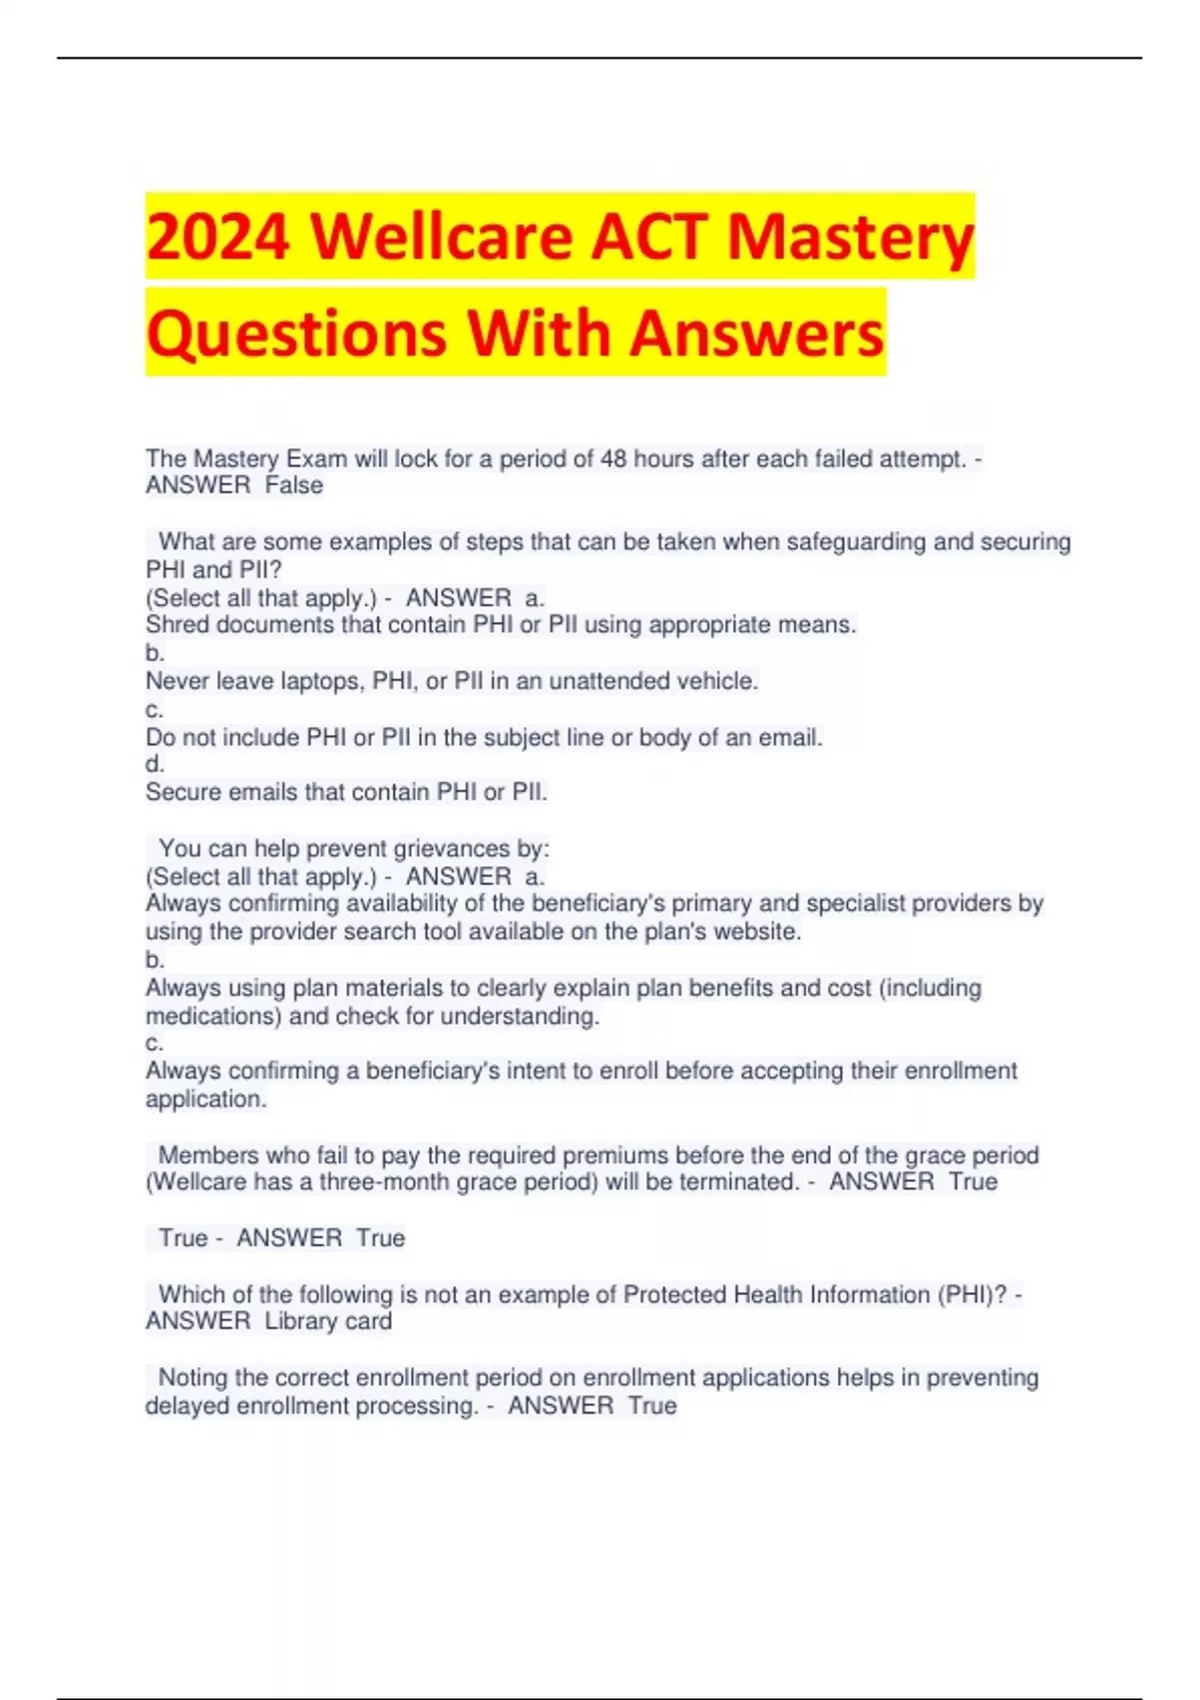 2024 Wellcare ACT Mastery Questions With Answers Wellcare ACT Mastery